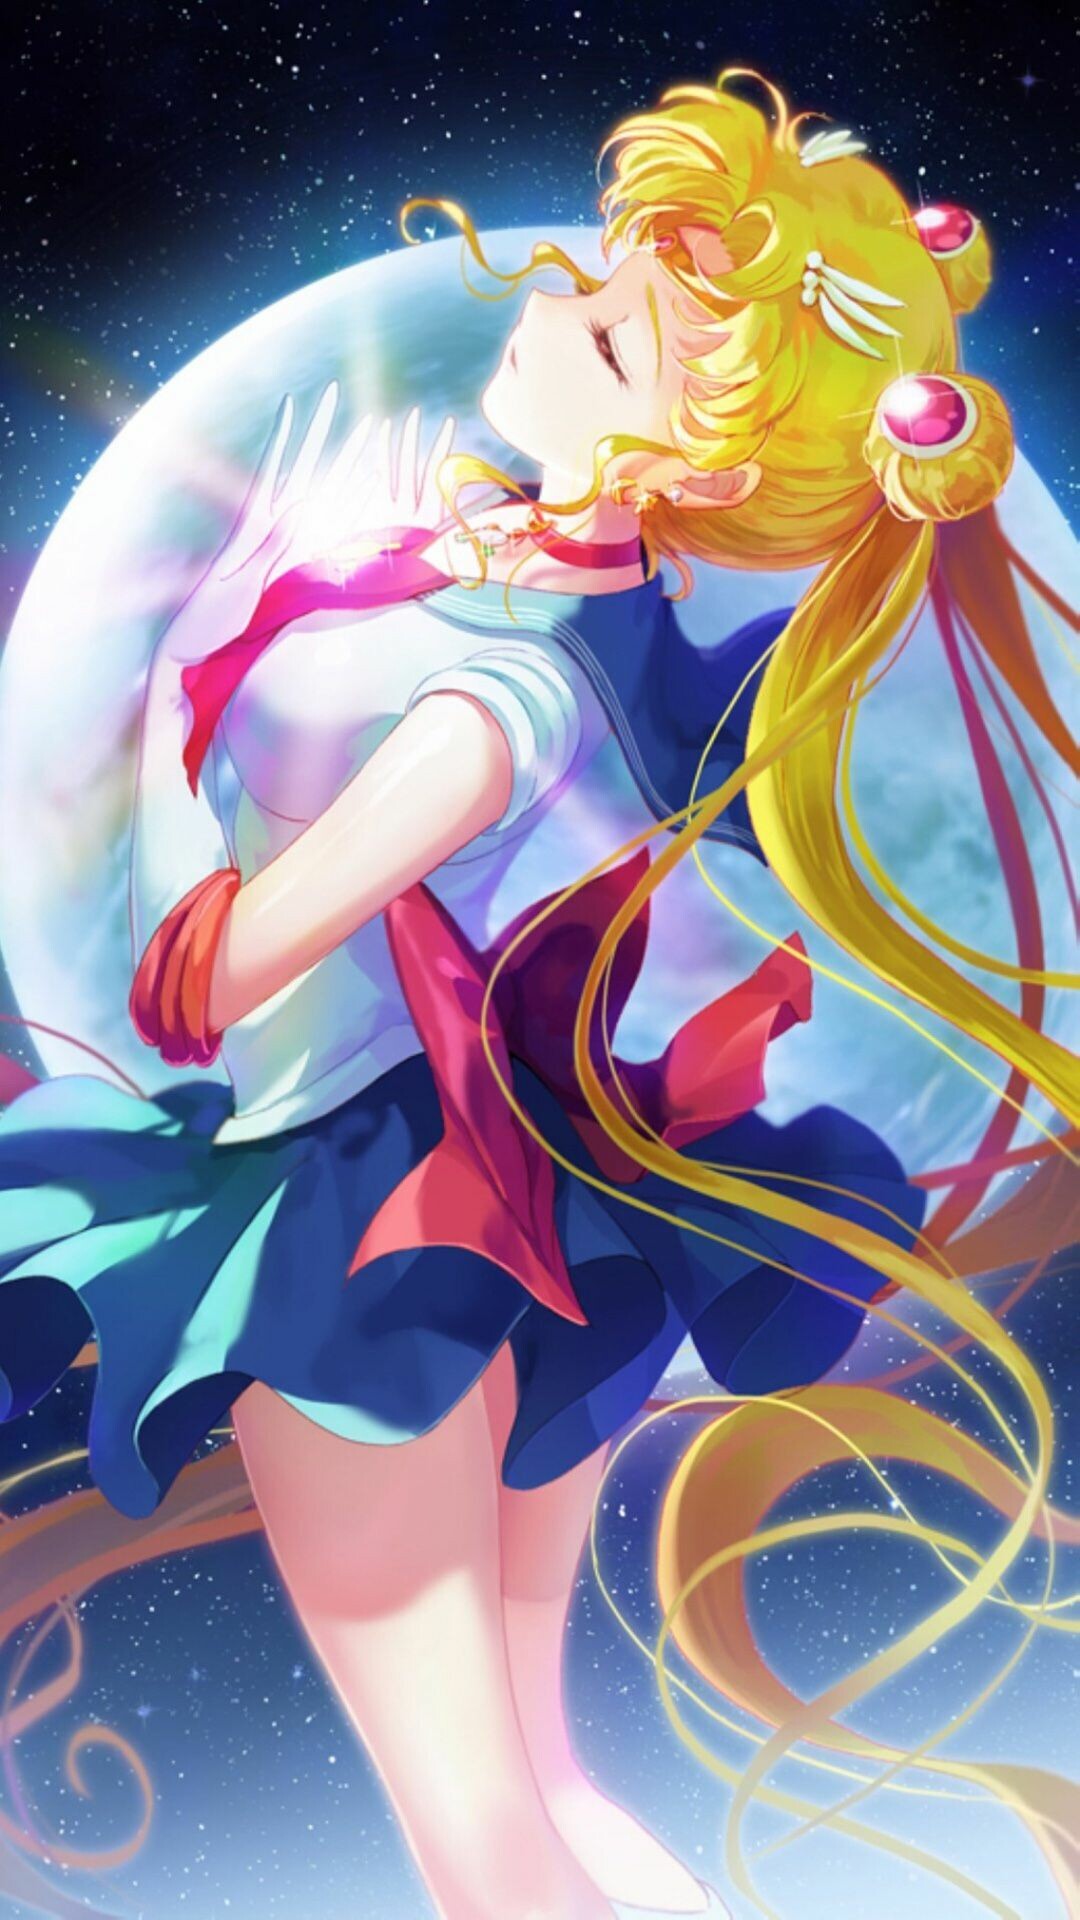 Sailor Moon Eternal: Anime, Based on the Dream arc of the manga by Naoko Takeuchi. 1080x1920 Full HD Background.